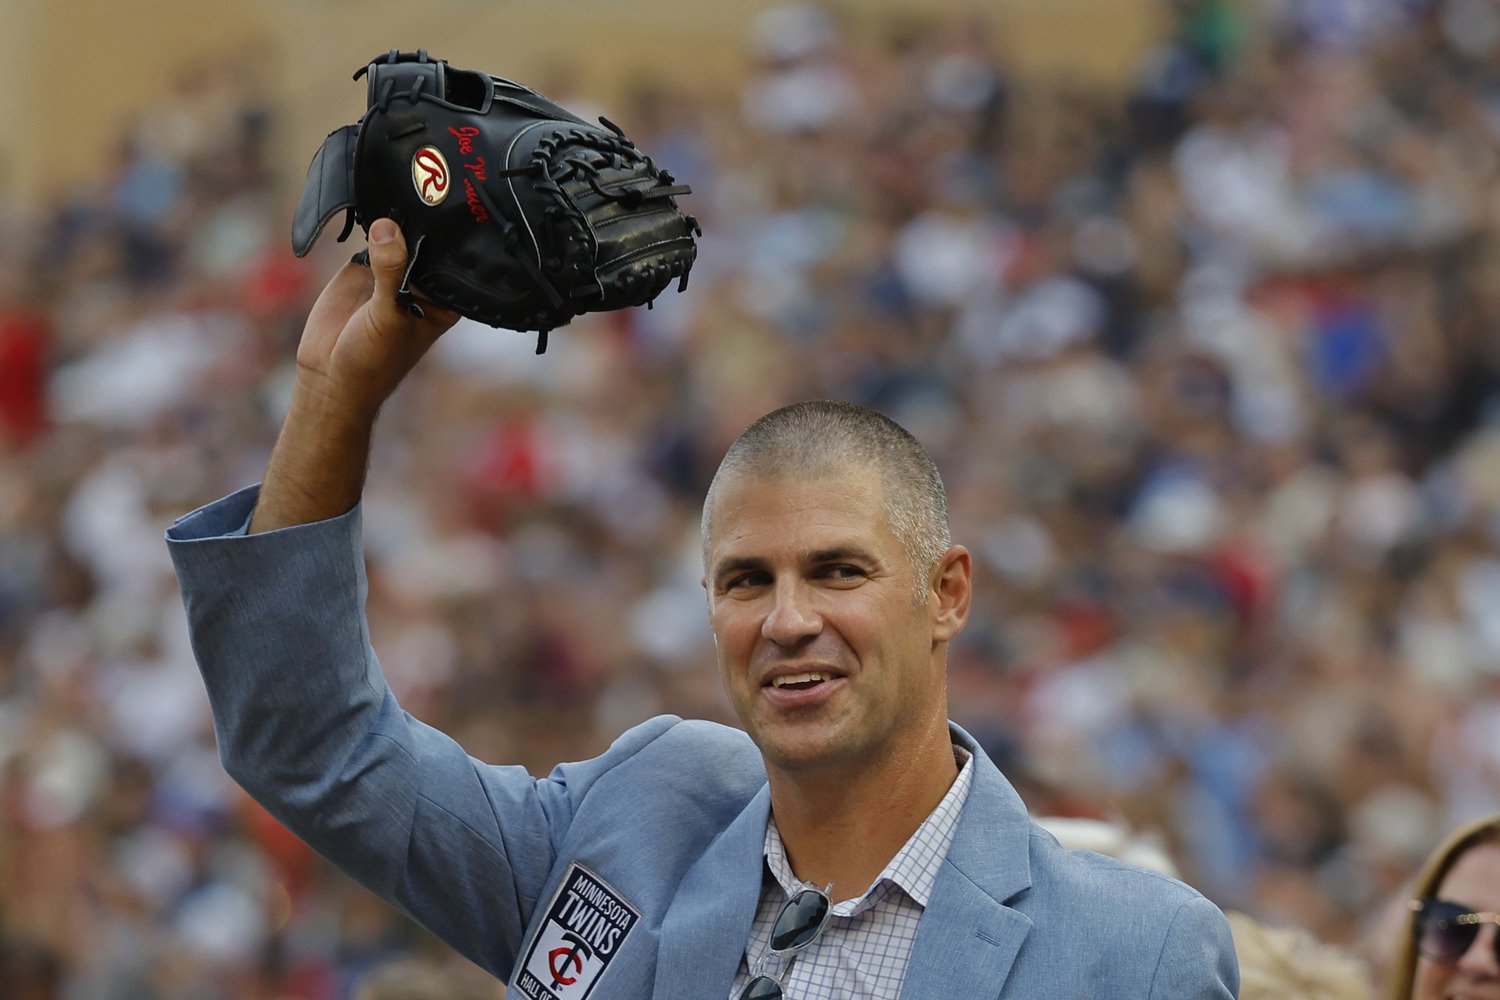 Watch: Best moments from Joe Mauer's jersey retirement ceremony